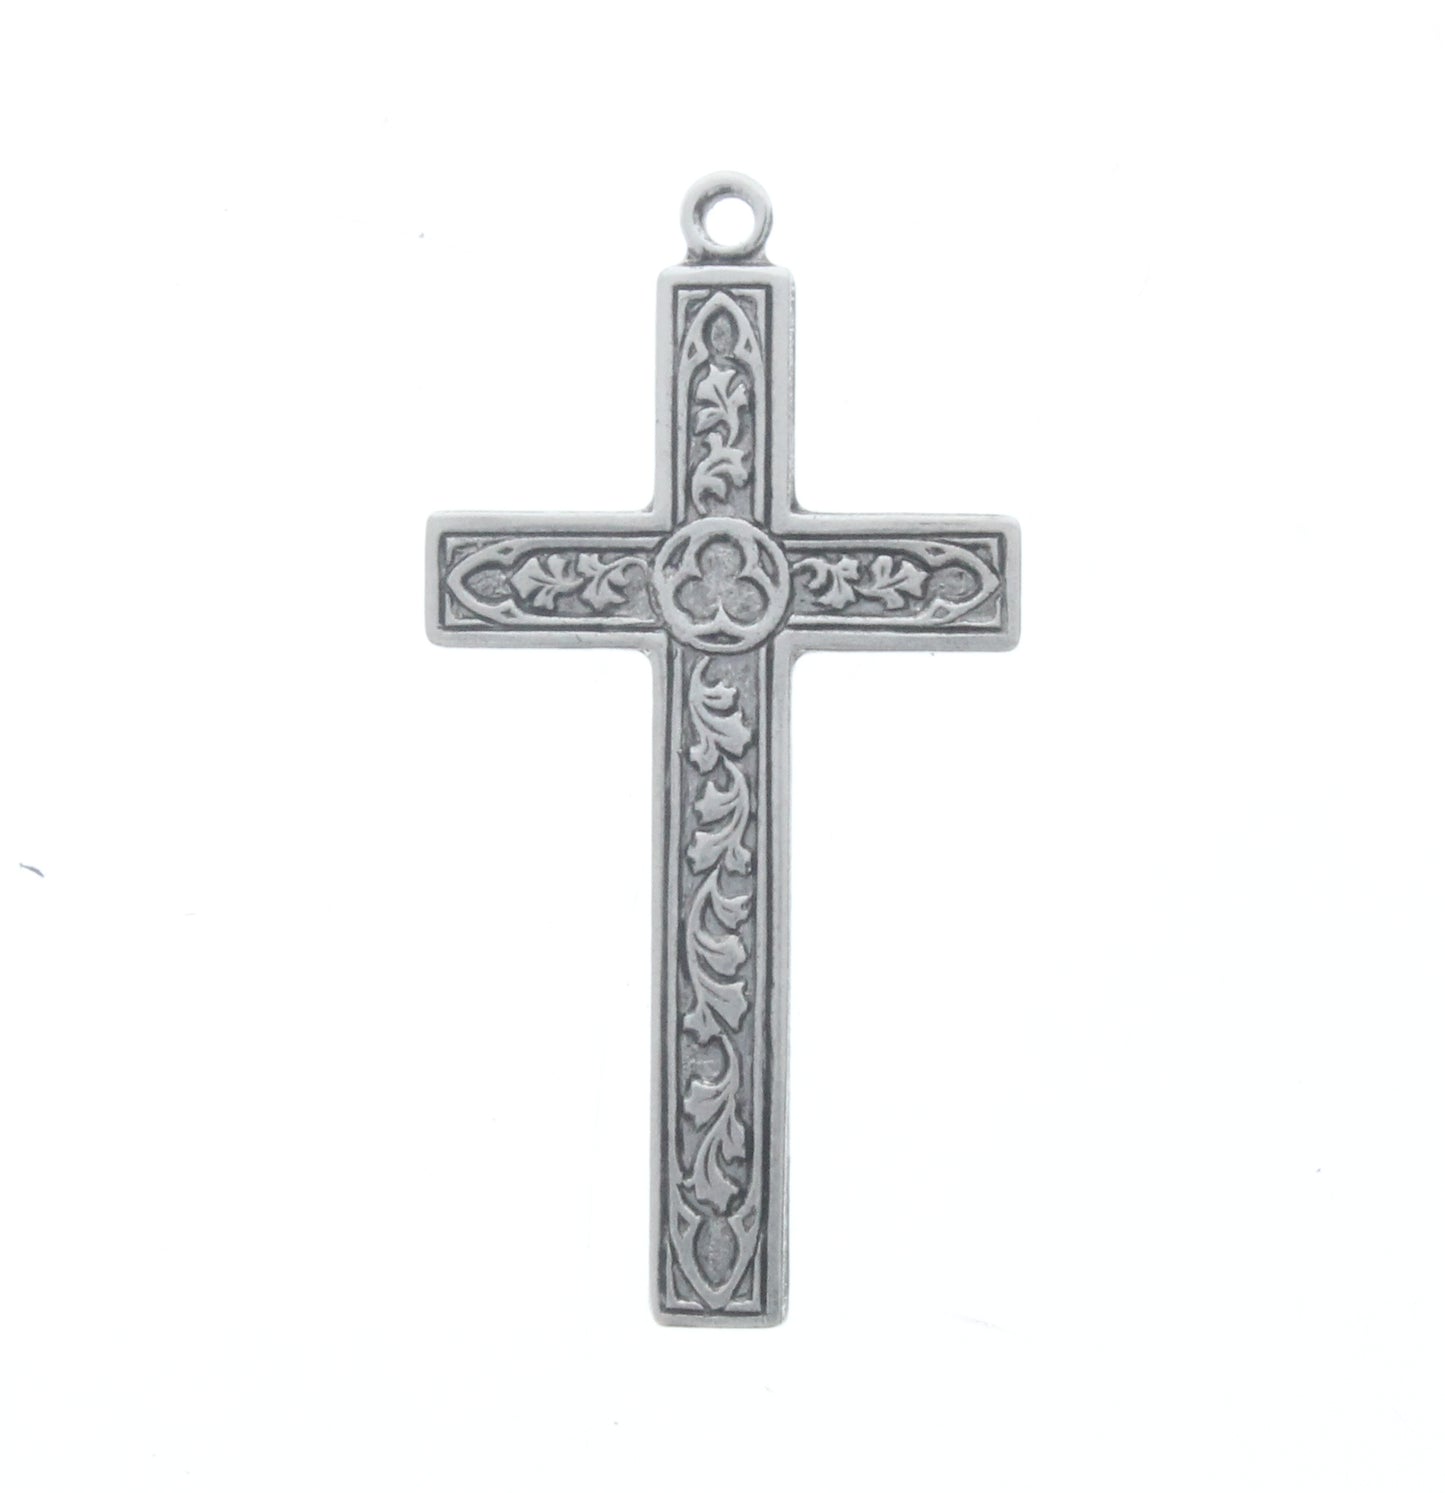 Classic Silver Floral Cross Charm, Pk/6